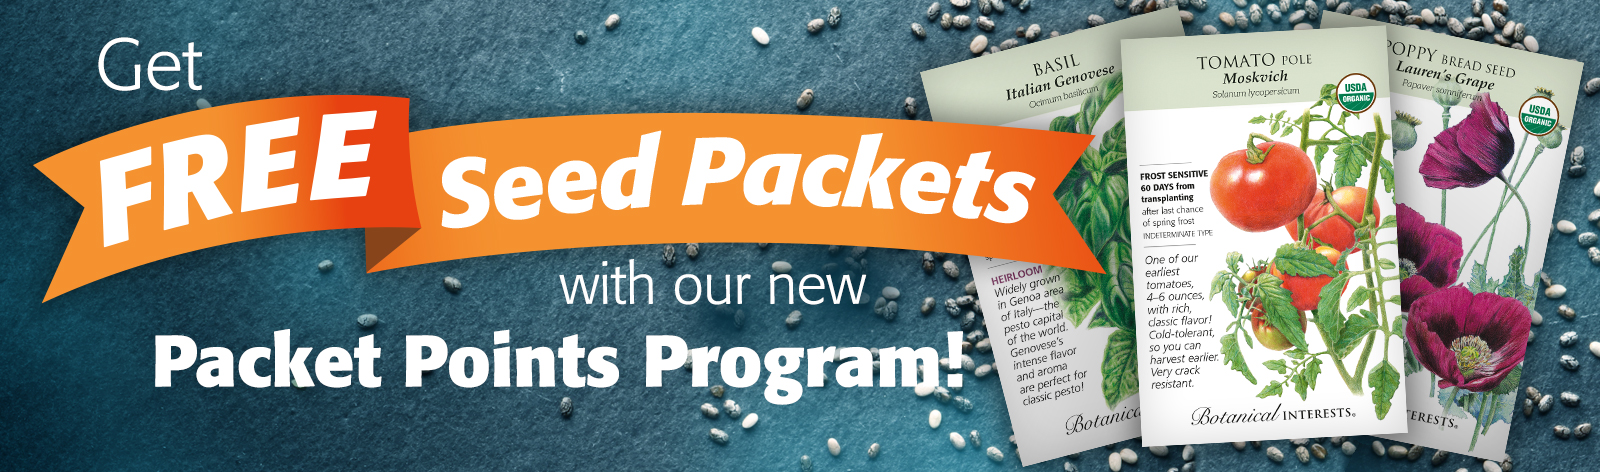 Get FREE Seed Packets with our new Packet Points Program!